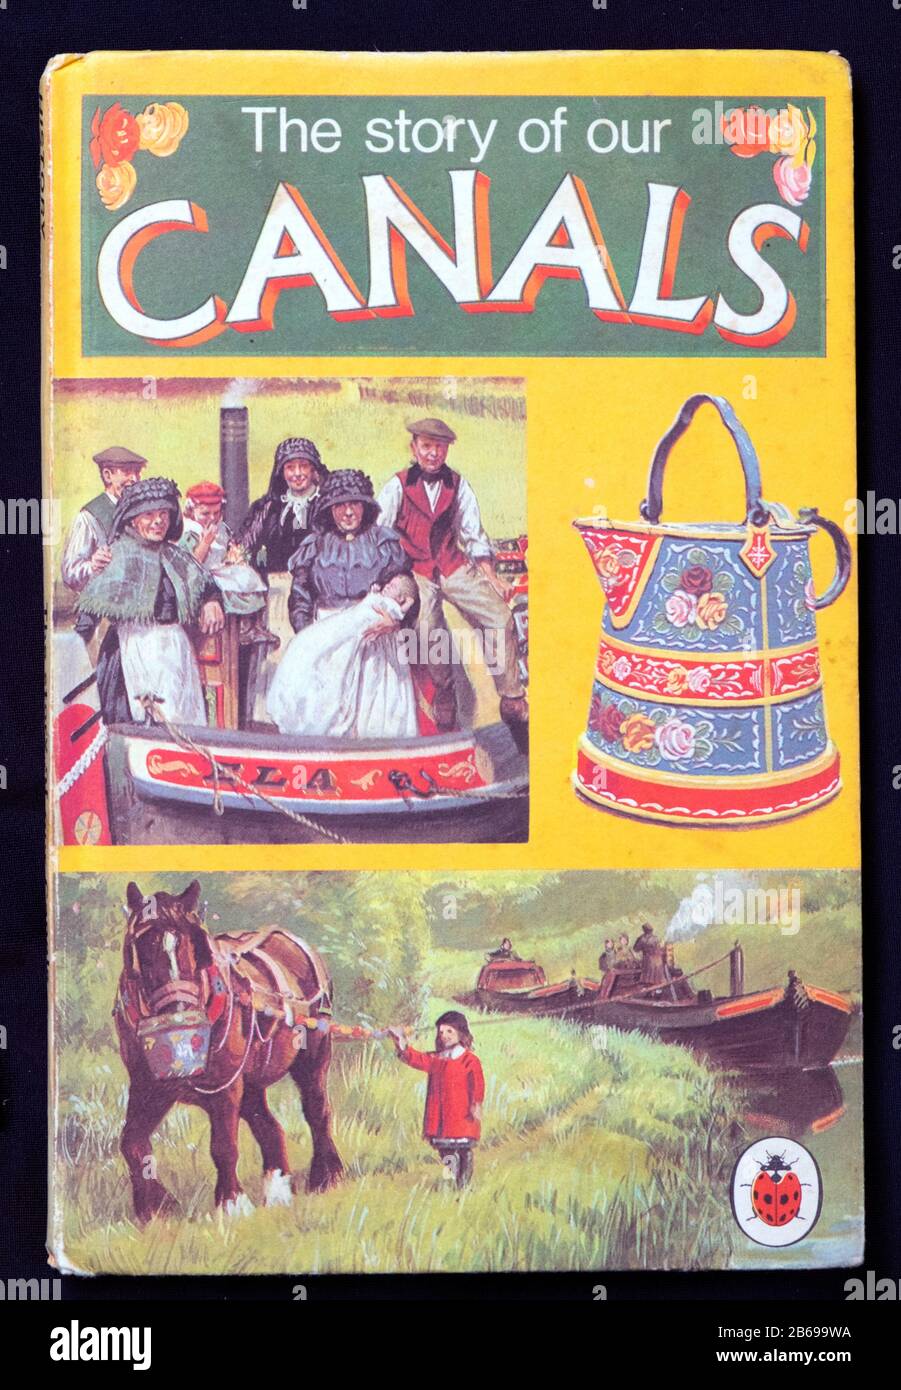 1970s Ladybird book front cover  'The Story of our Canals' England UK   KATHY DEWITT Stock Photo